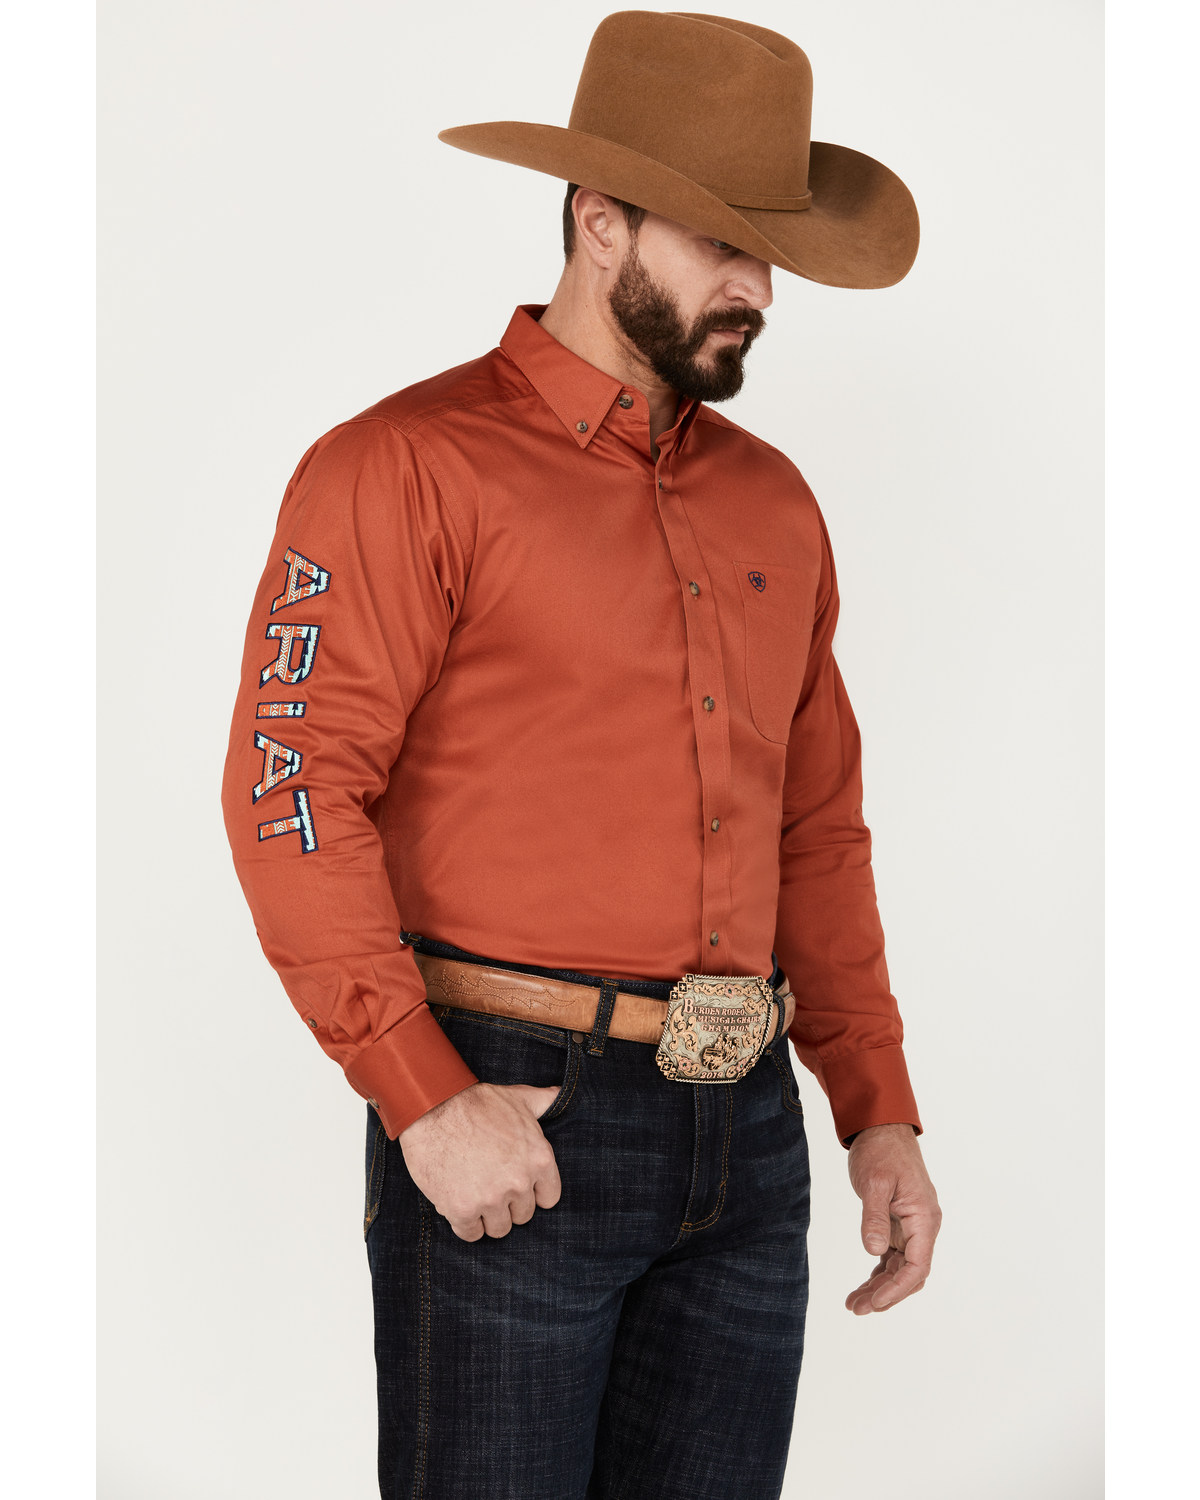 Ariat Men's Team Embroidered Logo Twill Classic Fit Long Sleeve Button Down Western Shirt